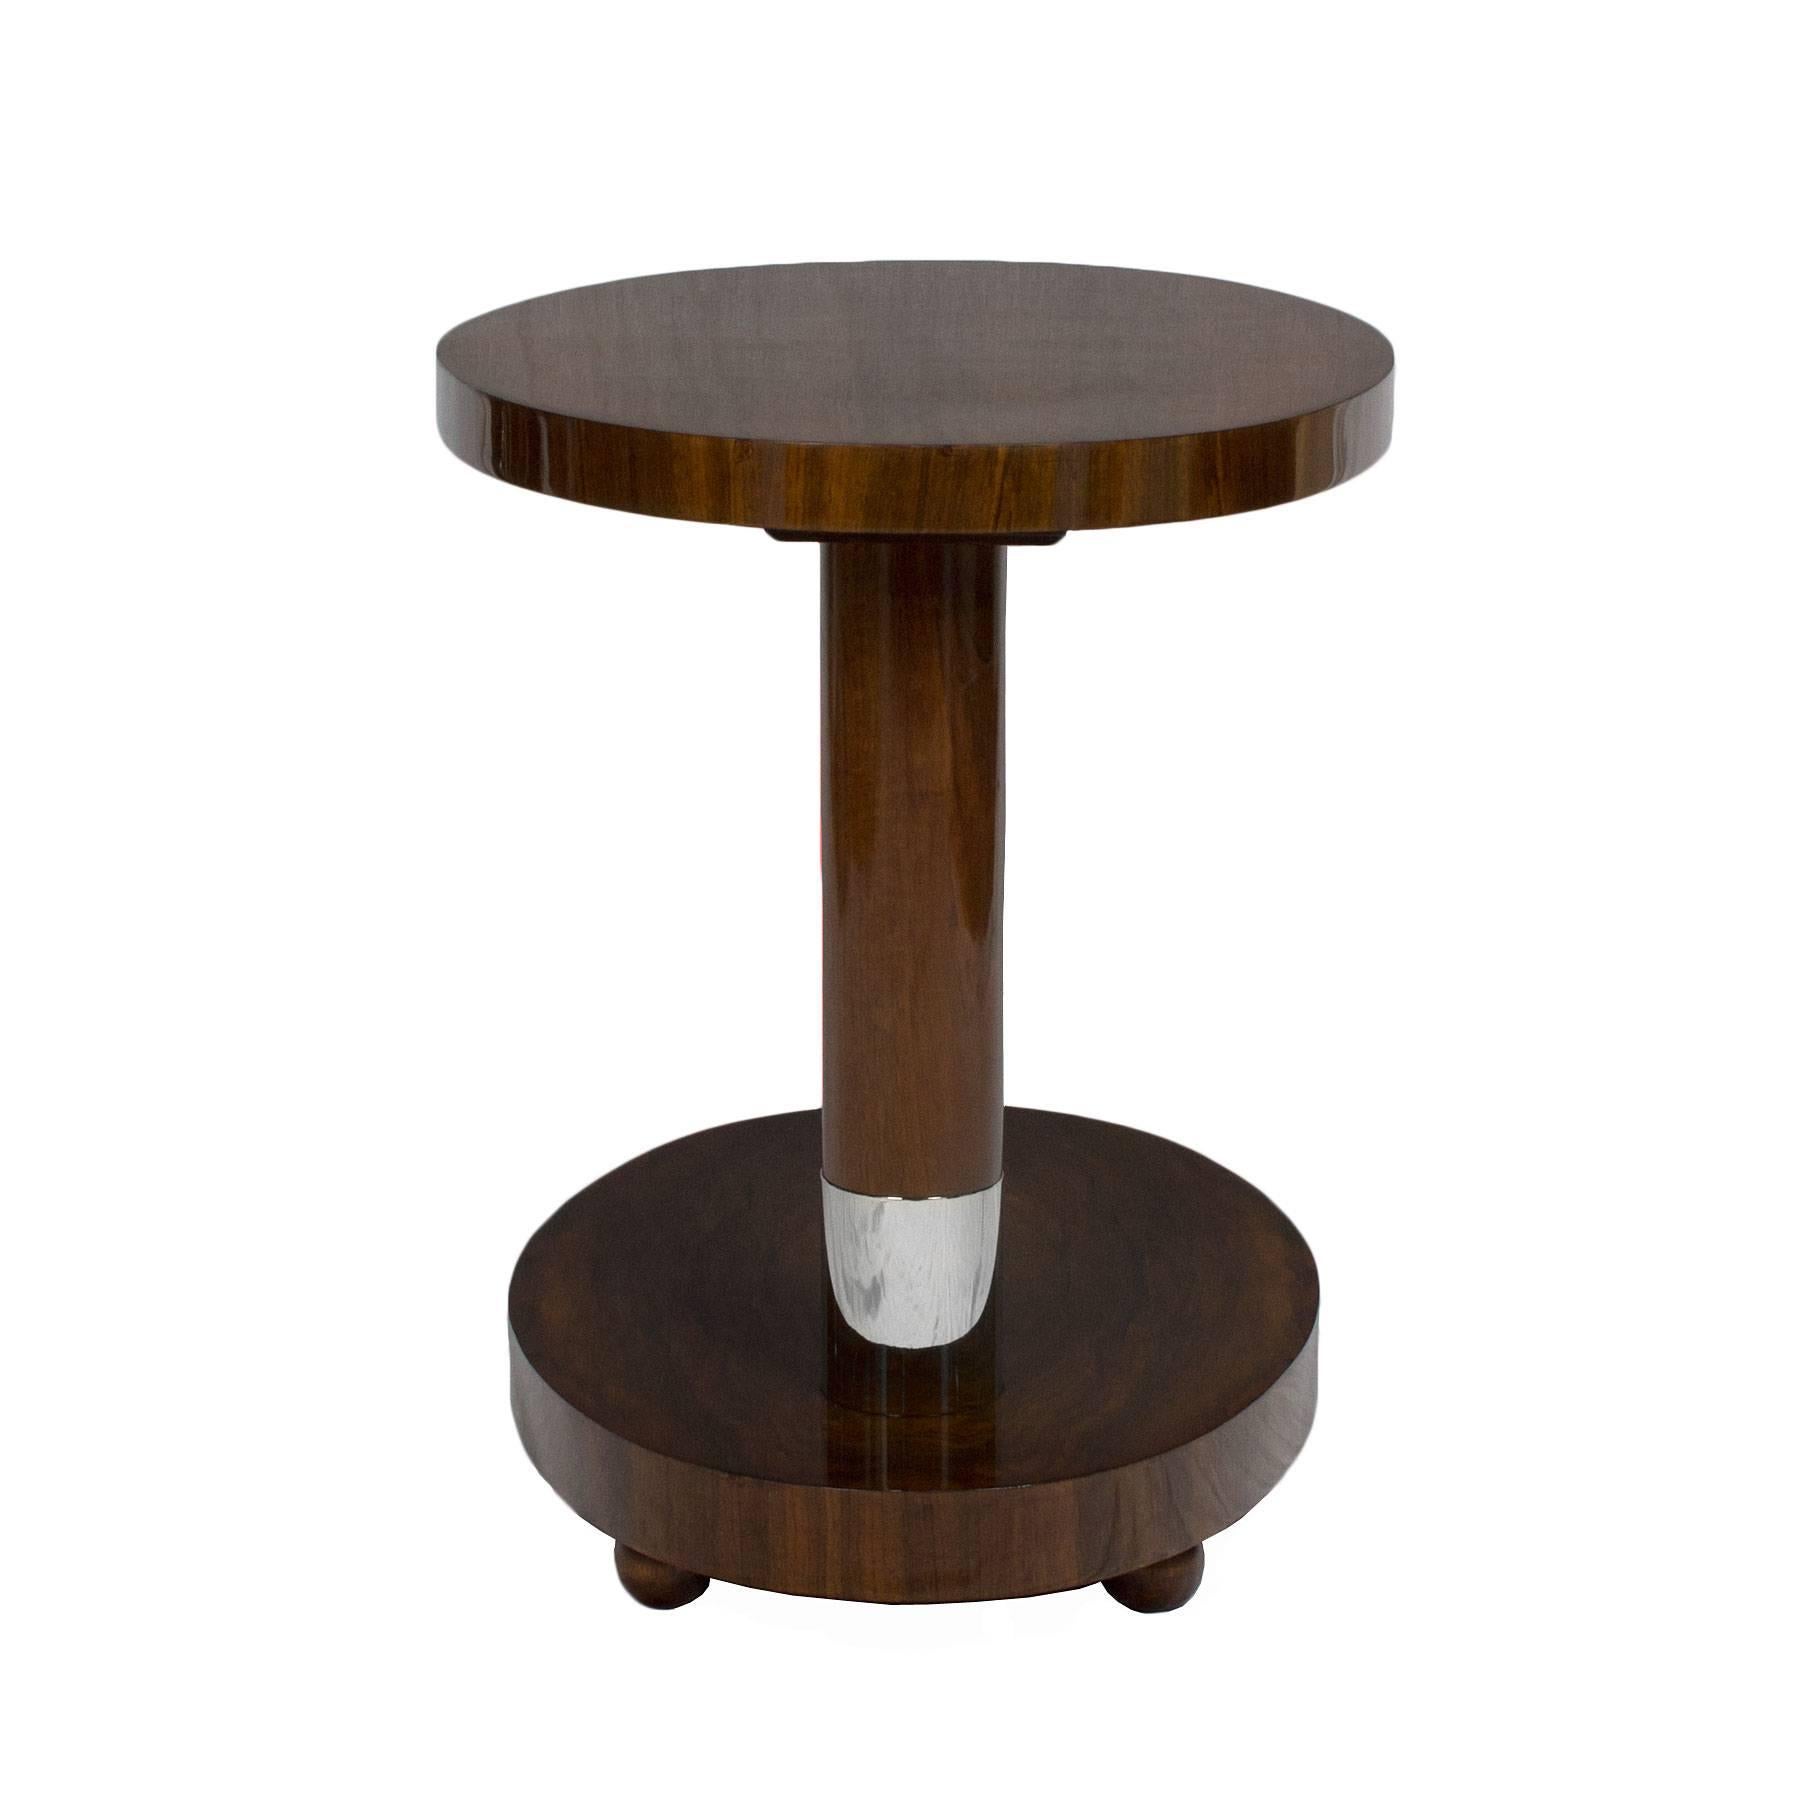 Mid-Century Modern 1940s Oval Side Table, Solid Walnut and Veneer, Nickel Plated Brass, France